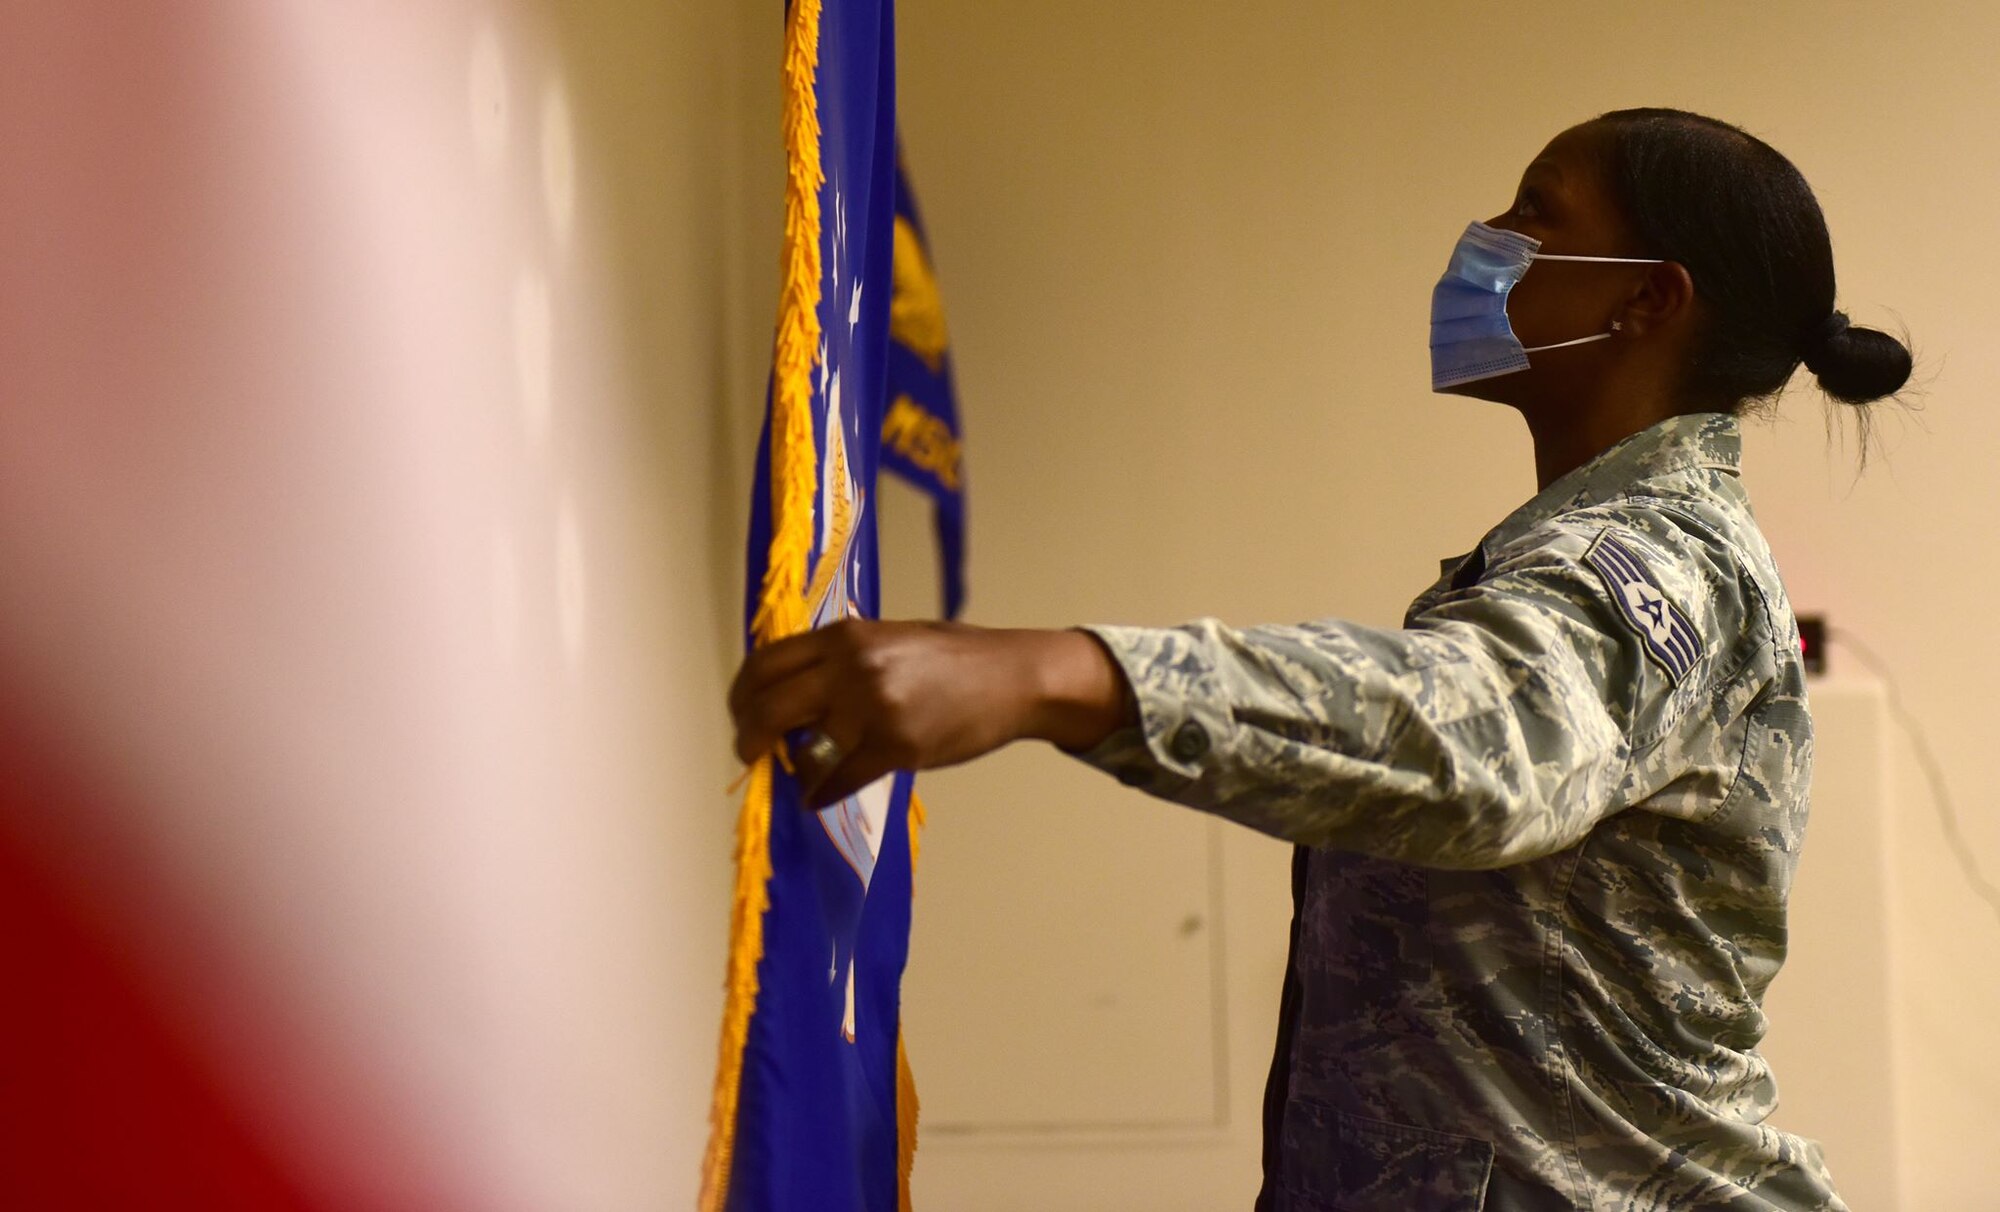 Staff Sgt. Tiffany pulls out the Air Force flag behind the United States flag.